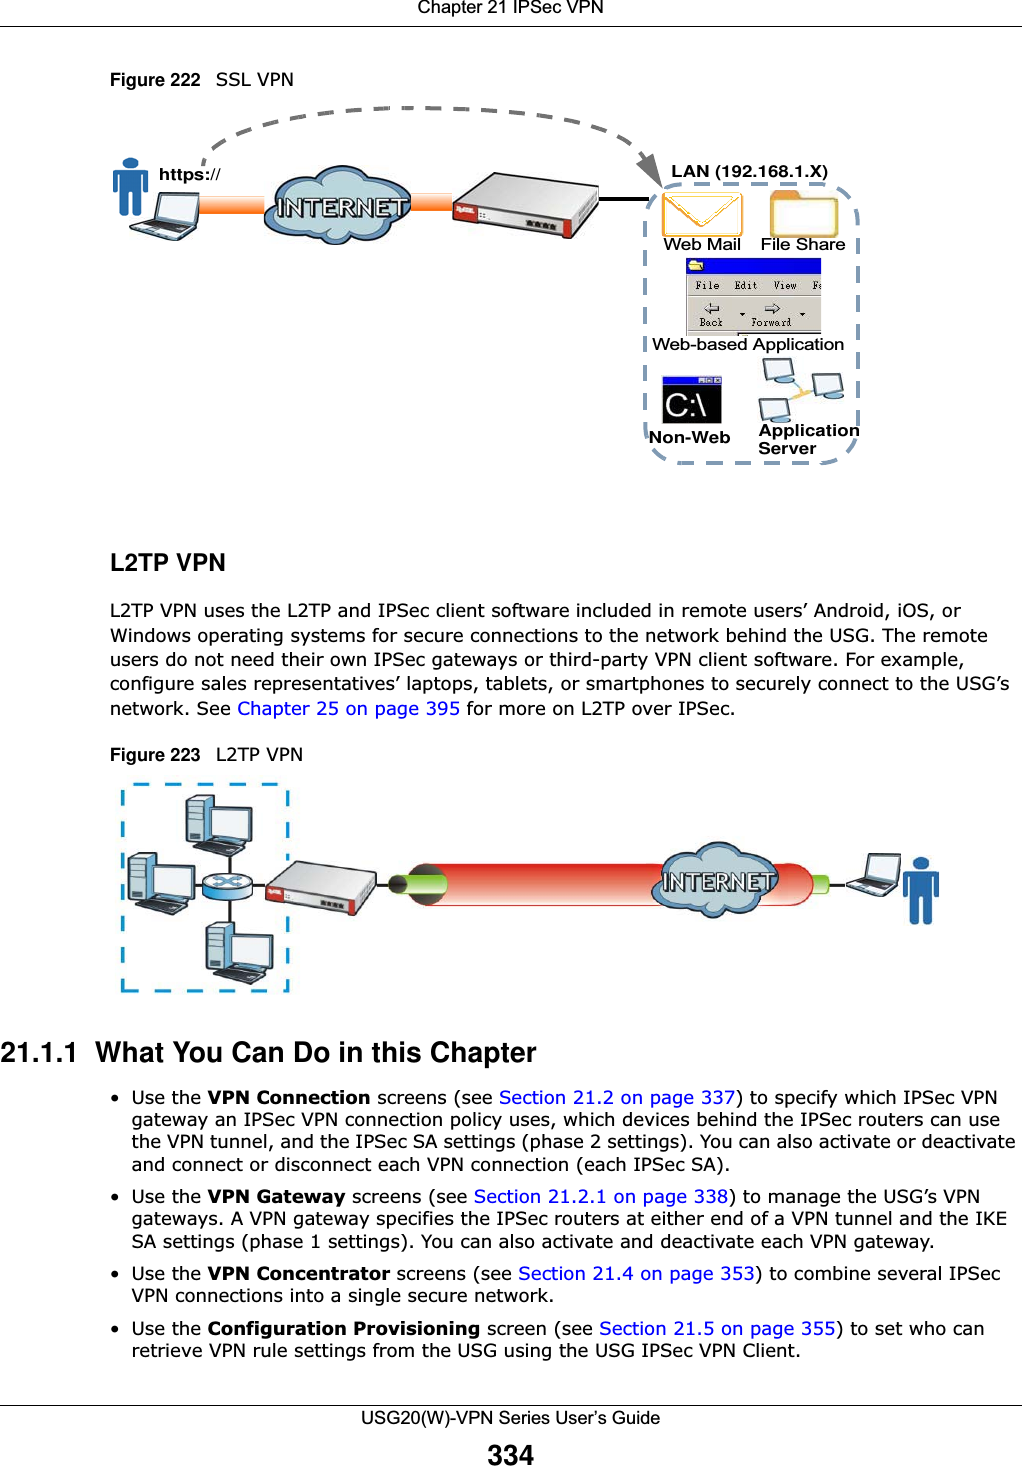 Chapter 21 IPSec VPNUSG20(W)-VPN Series User’s Guide334Figure 222   SSL VPN L2TP VPNL2TP VPN uses the L2TP and IPSec client software included in remote users’ Android, iOS, or Windows operating systems for secure connections to the network behind the USG. The remote users do not need their own IPSec gateways or third-party VPN client software. For example, configure sales representatives’ laptops, tablets, or smartphones to securely connect to the USG’s network. See Chapter 25 on page 395 for more on L2TP over IPSec.Figure 223   L2TP VPN 21.1.1  What You Can Do in this Chapter•Use the VPN Connection screens (see Section 21.2 on page 337) to specify which IPSec VPN gateway an IPSec VPN connection policy uses, which devices behind the IPSec routers can use the VPN tunnel, and the IPSec SA settings (phase 2 settings). You can also activate or deactivate and connect or disconnect each VPN connection (each IPSec SA).•Use the VPN Gateway screens (see Section 21.2.1 on page 338) to manage the USG’s VPN gateways. A VPN gateway specifies the IPSec routers at either end of a VPN tunnel and the IKE SA settings (phase 1 settings). You can also activate and deactivate each VPN gateway.•Use the VPN Concentrator screens (see Section 21.4 on page 353) to combine several IPSec VPN connections into a single secure network.•Use the Configuration Provisioning screen (see Section 21.5 on page 355) to set who can retrieve VPN rule settings from the USG using the USG IPSec VPN Client.Web Mail File ShareWeb-based Applicationhttps://Application ServerNon-WebLAN (192.168.1.X)